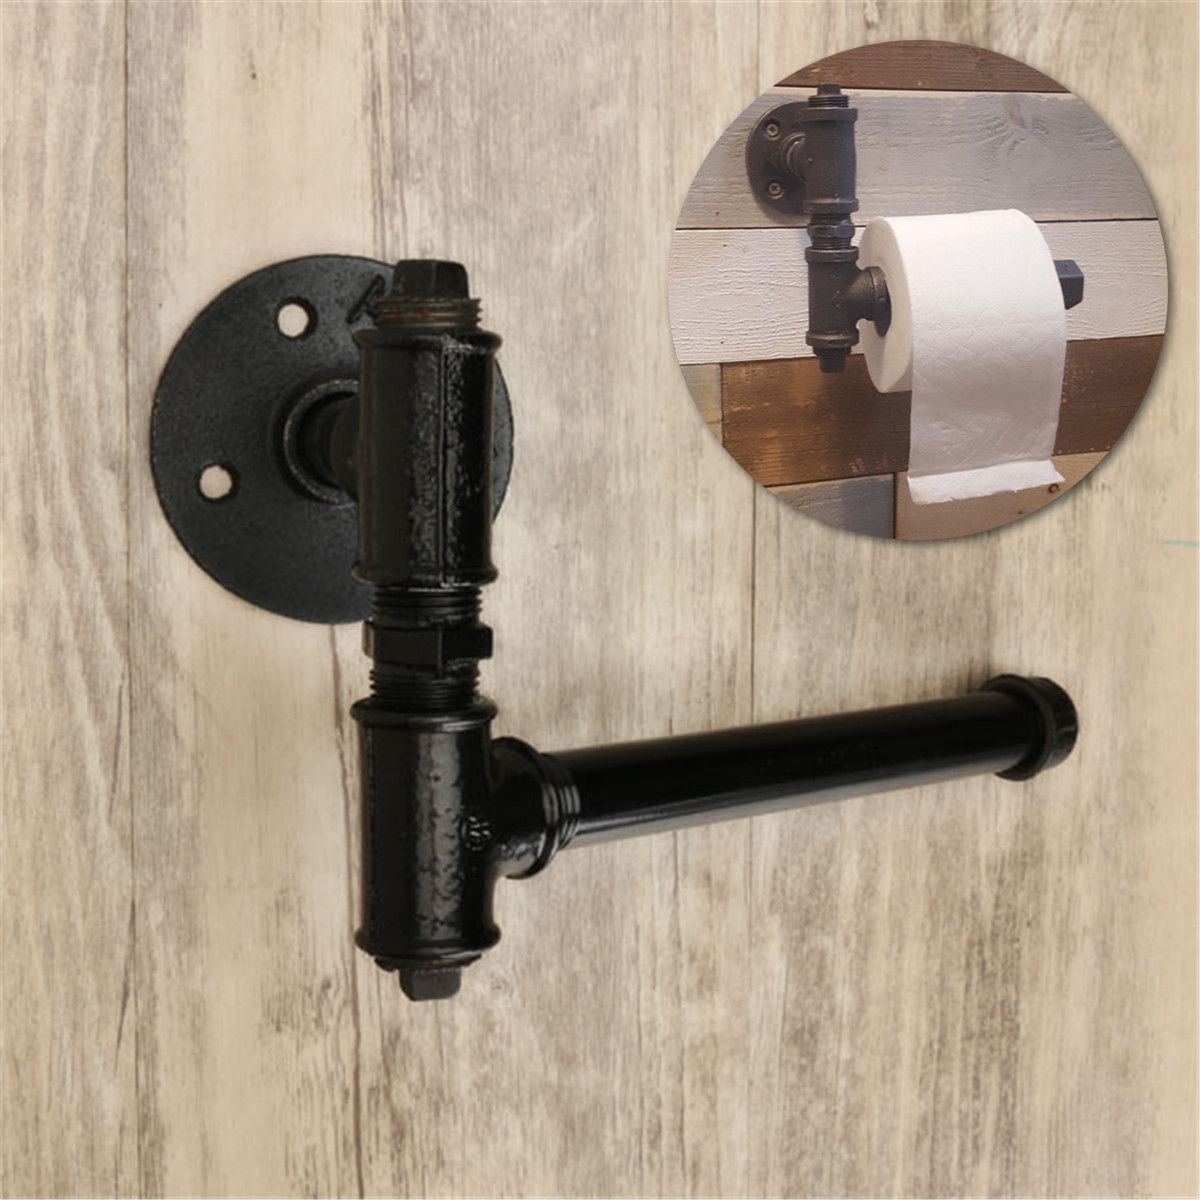 210mm-Industrial-Retro-Iron-Pipe-Tissue-Paper-Roll-Holder-Toliet-Wall-Mount-Hanger-1176525